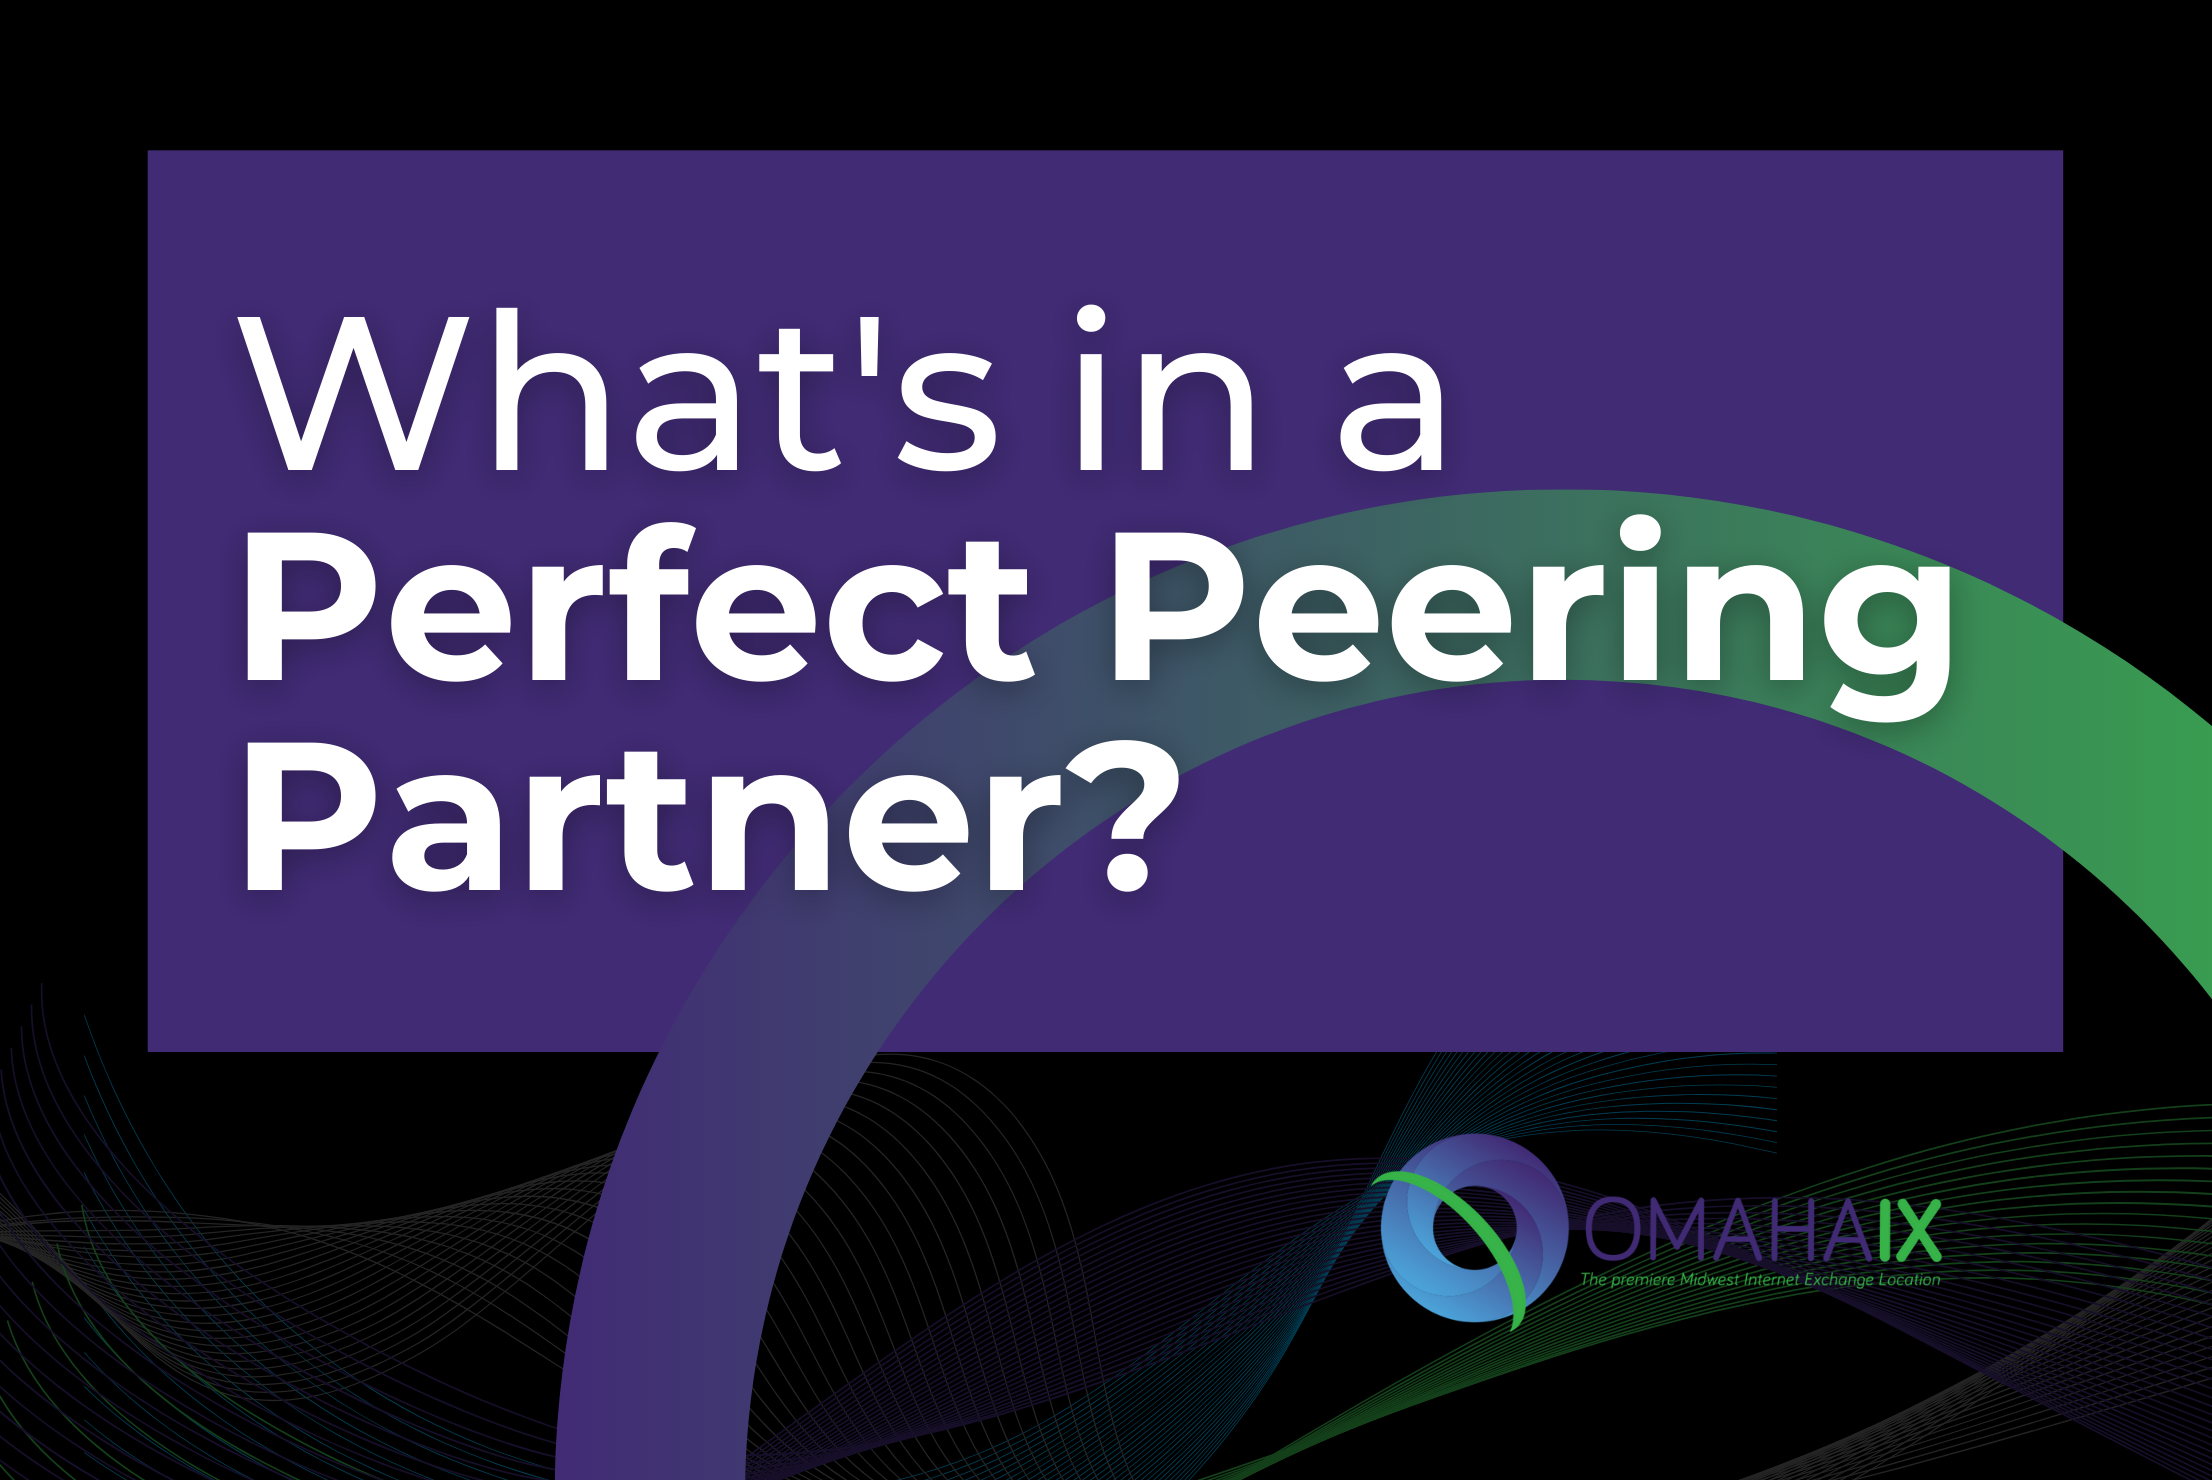 What's in a perfect peering partner?